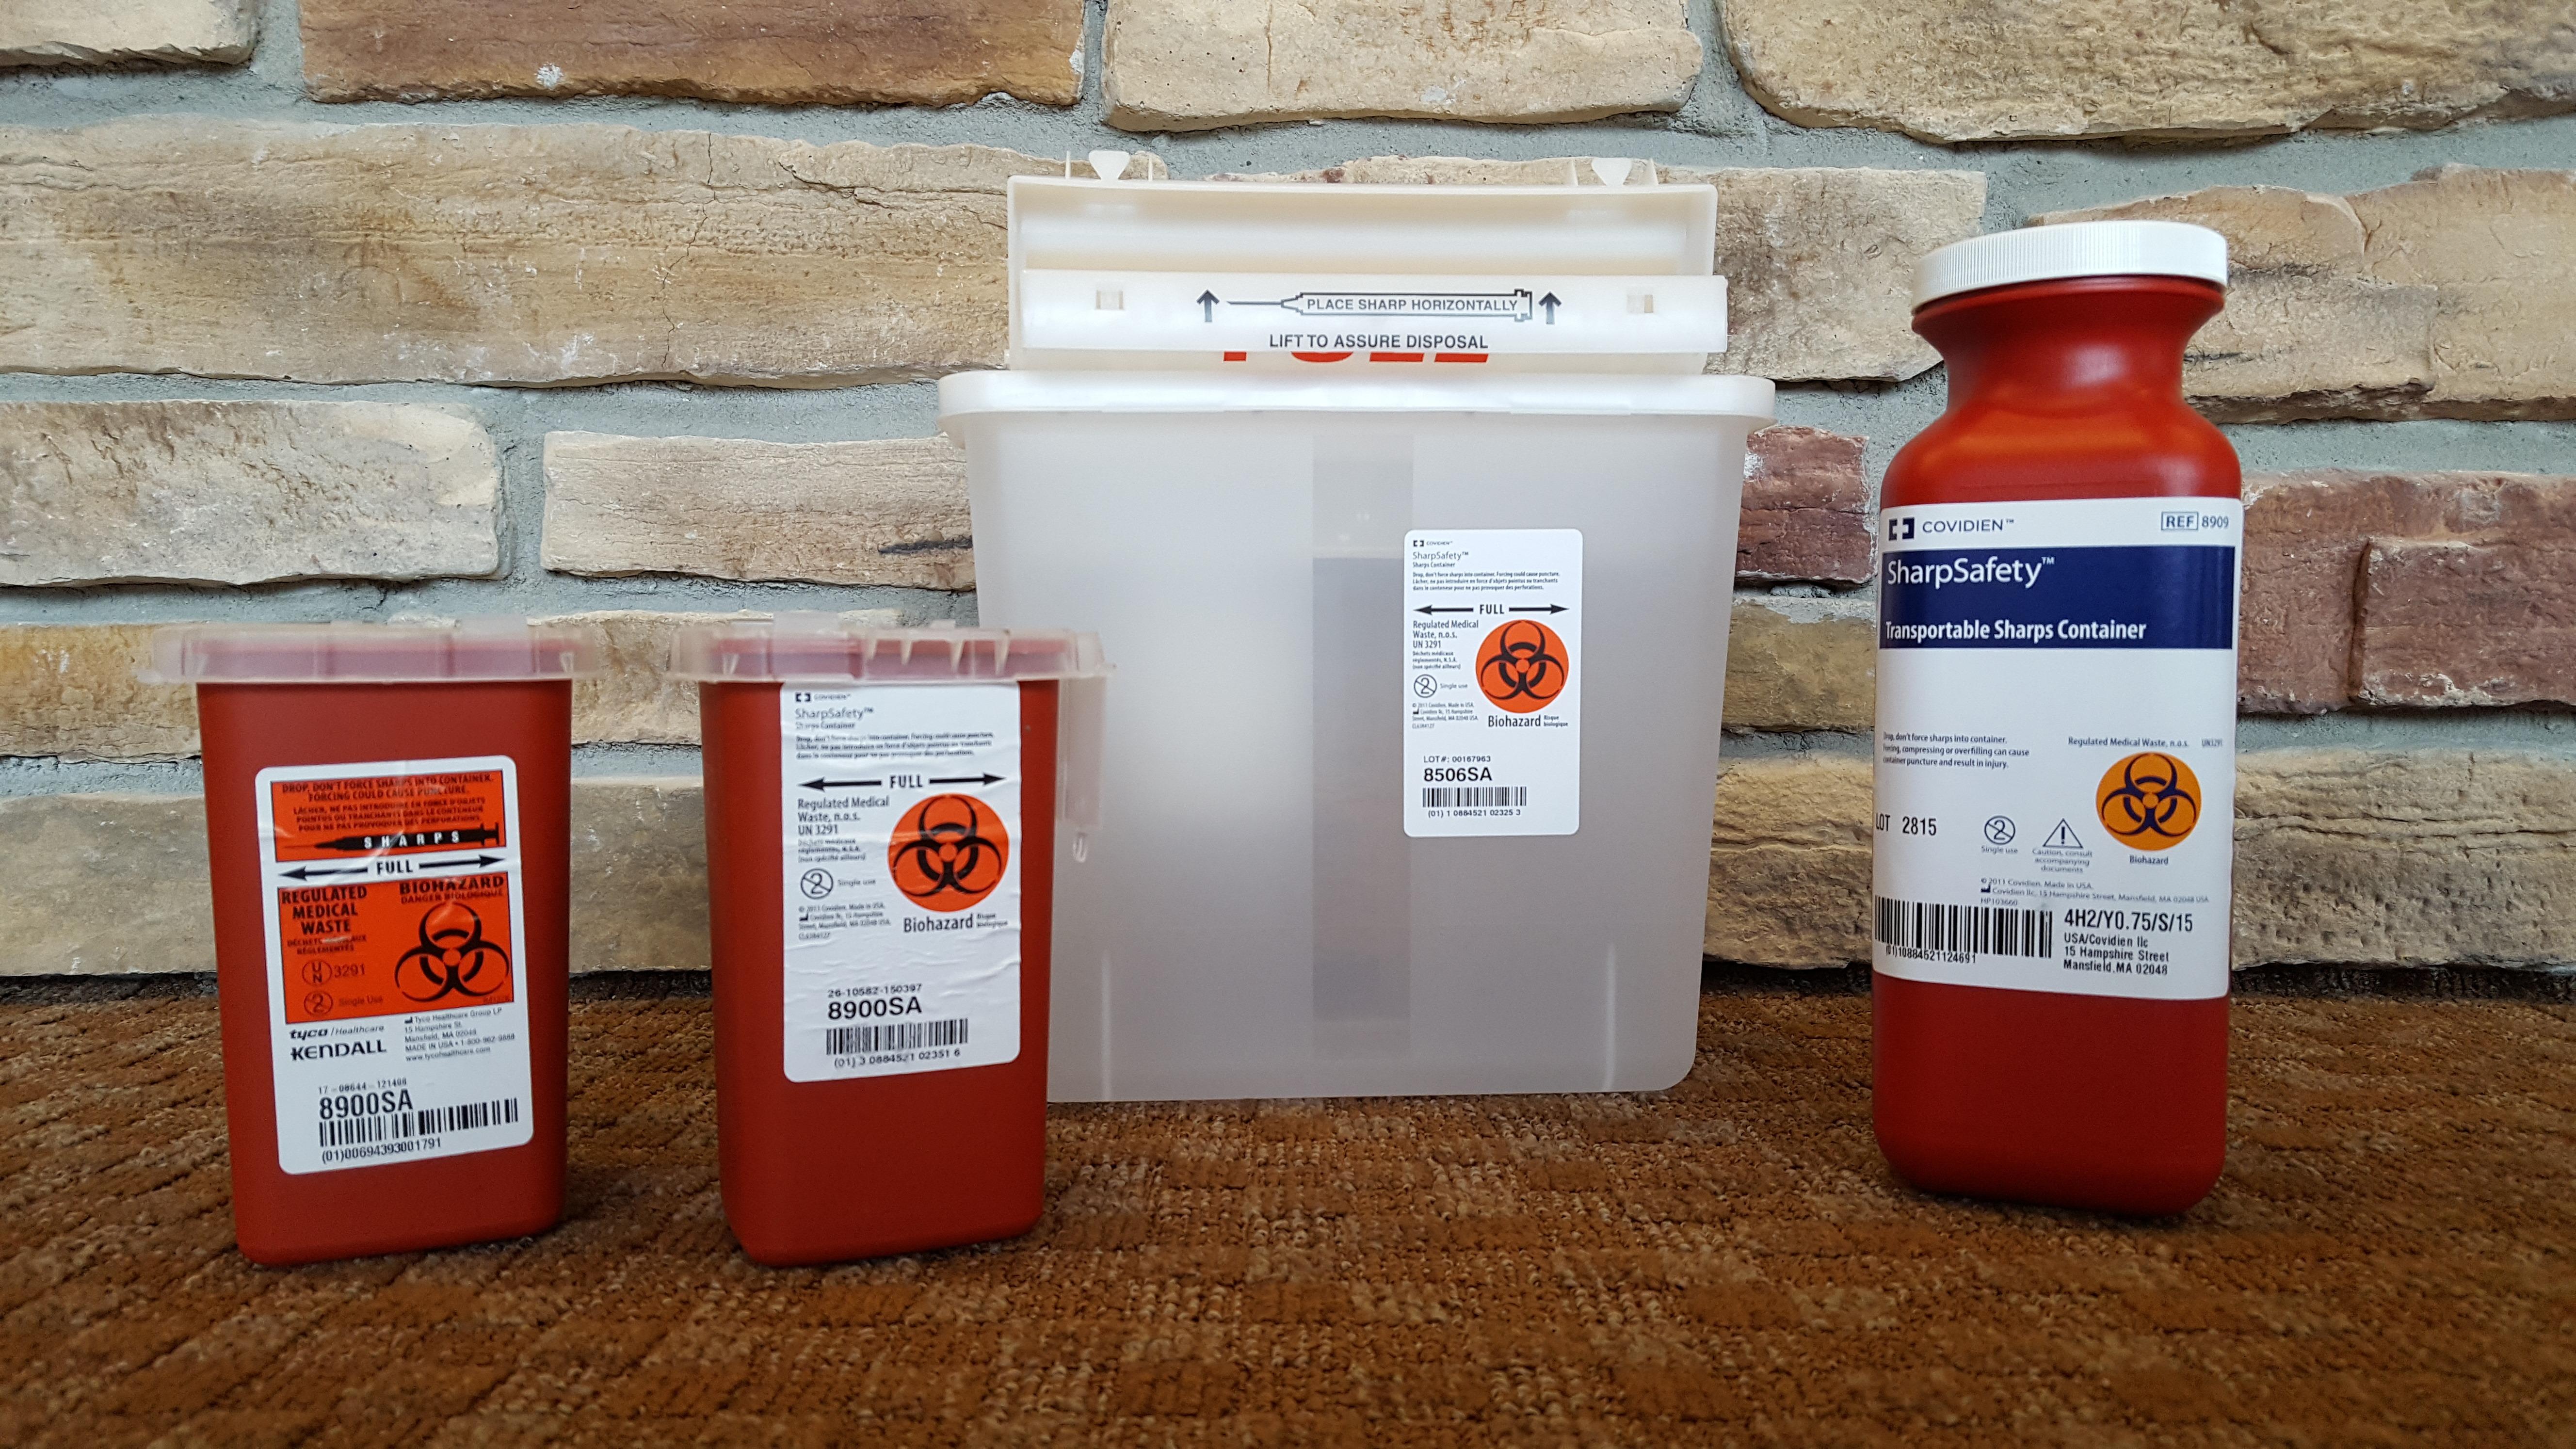 Medical Disposal Systems Photo